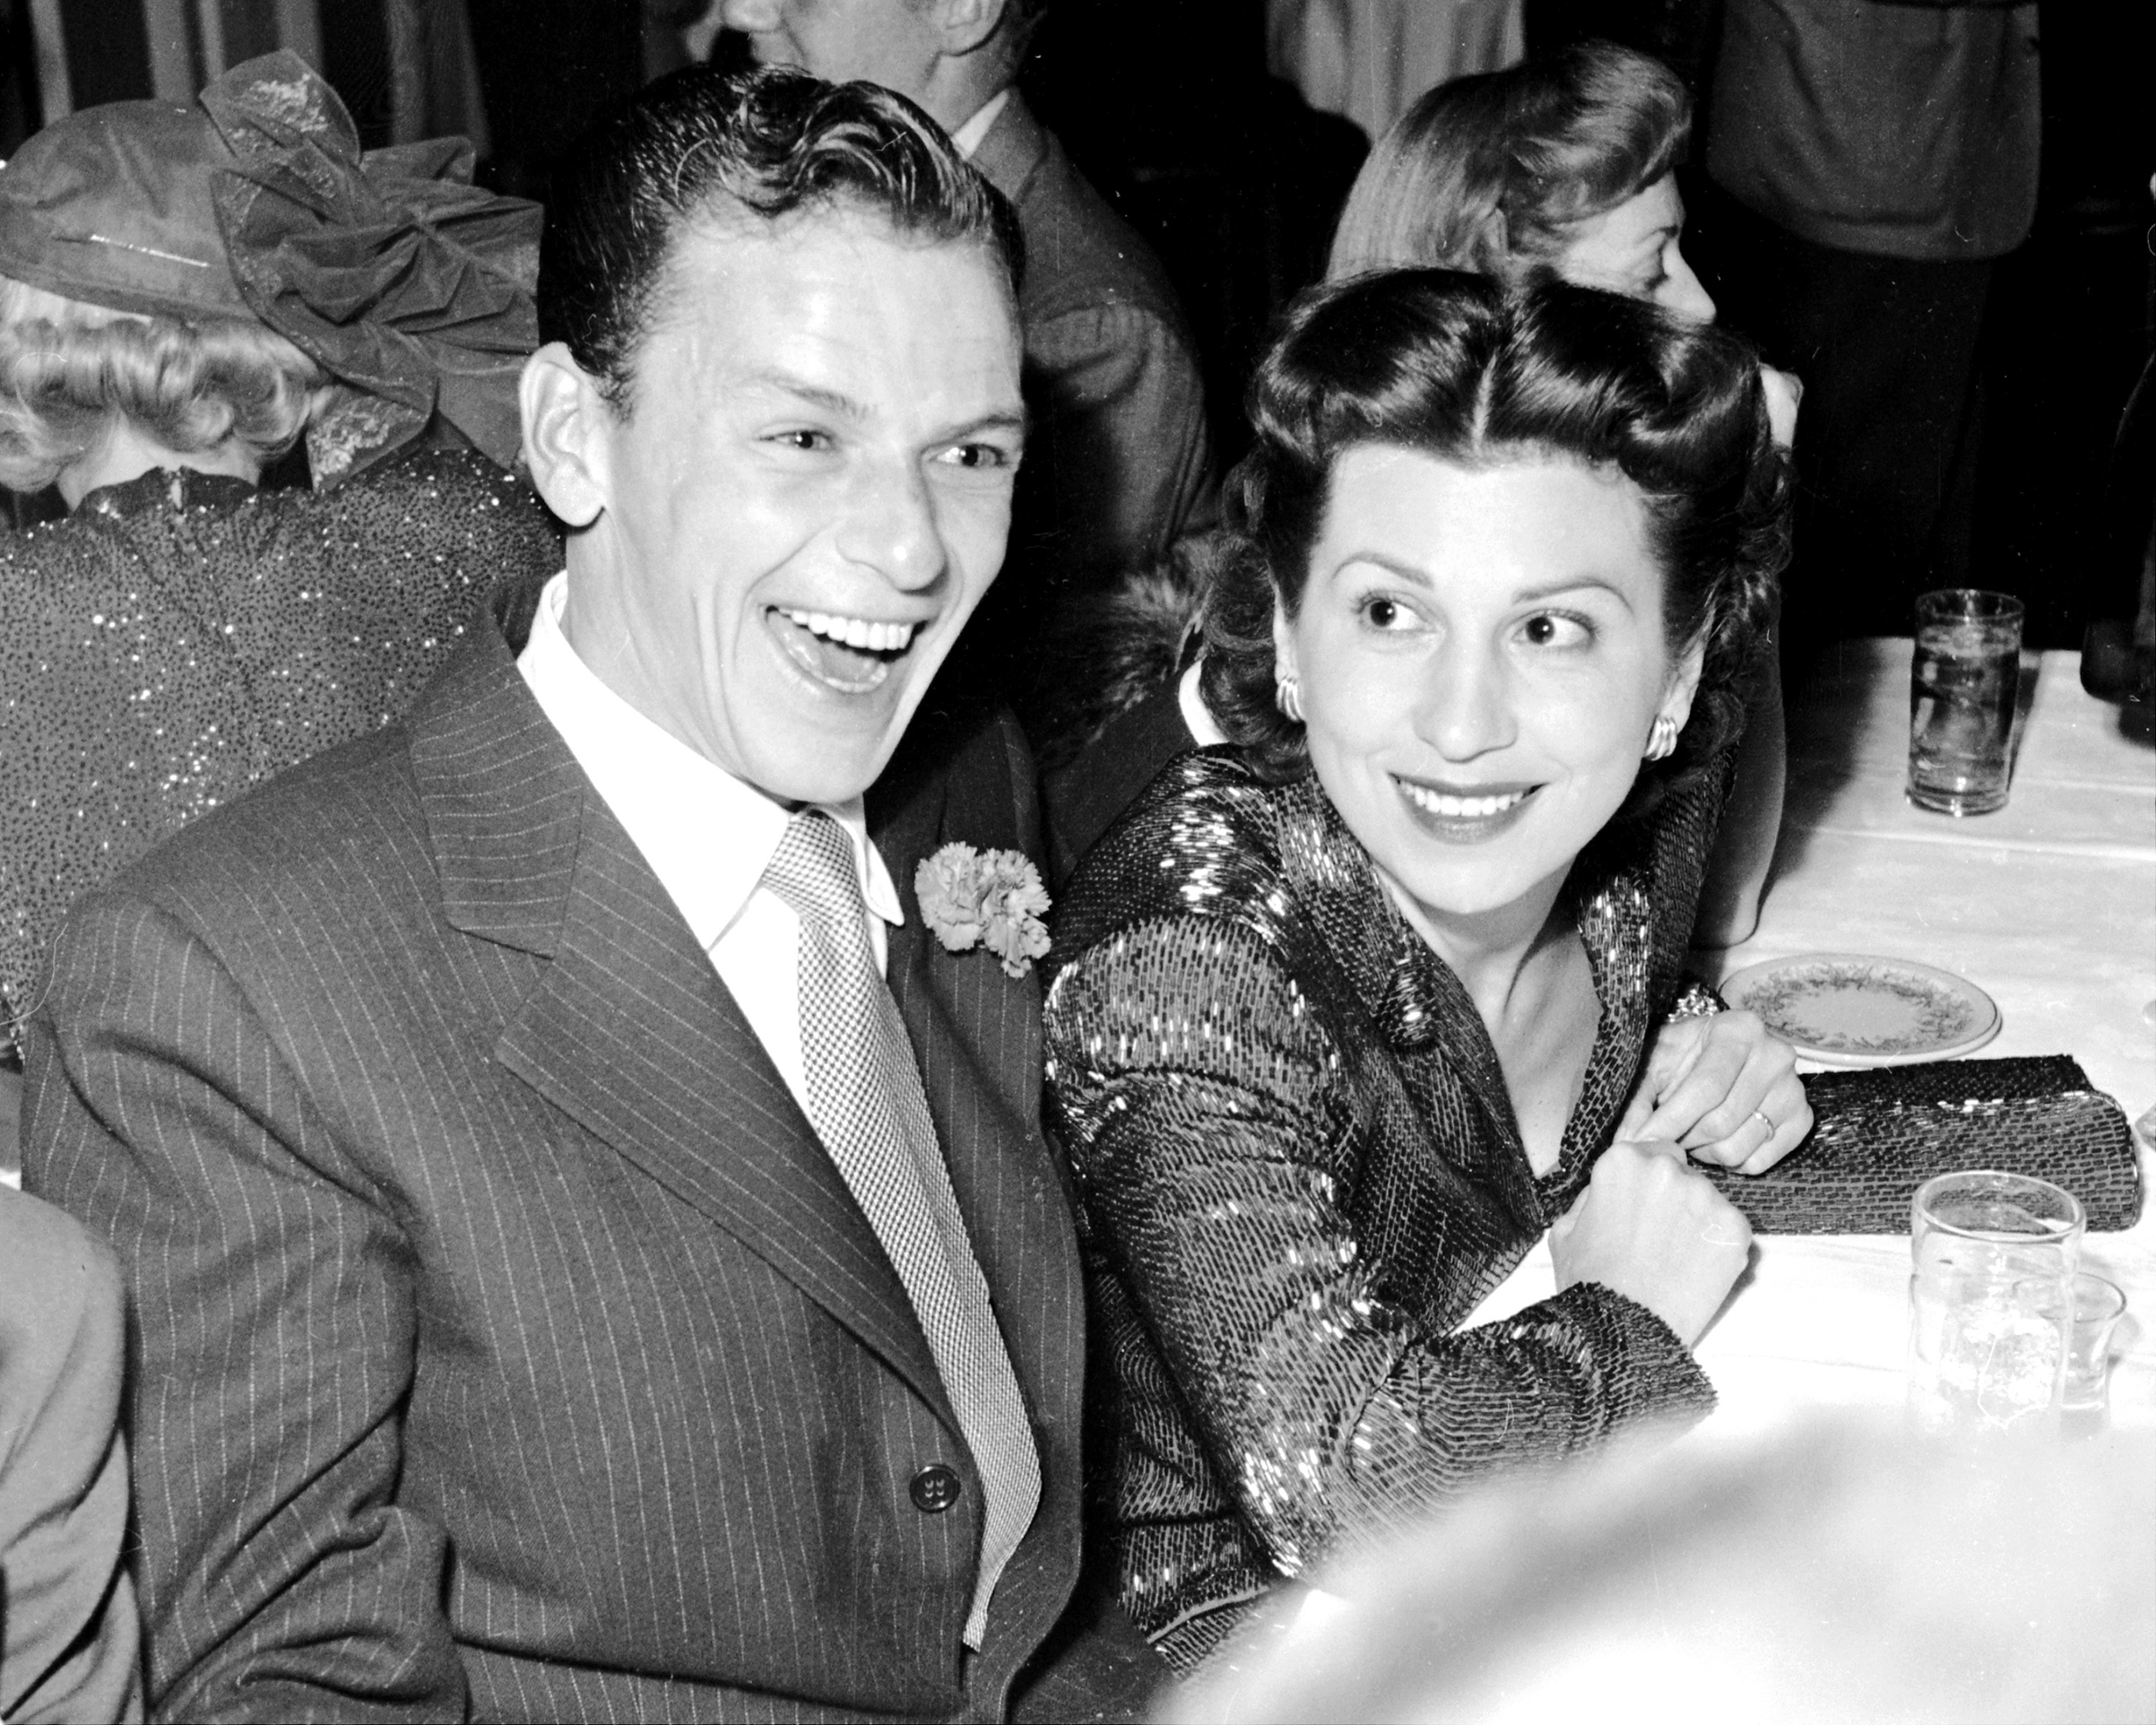 Frank Sinatra and Nancy Barbato Sinatra at the Mocambo in Hollywood on Jan. 11, 1949; they were married from 1939 to 1951. (New York Daily News Archive/Getty Images)